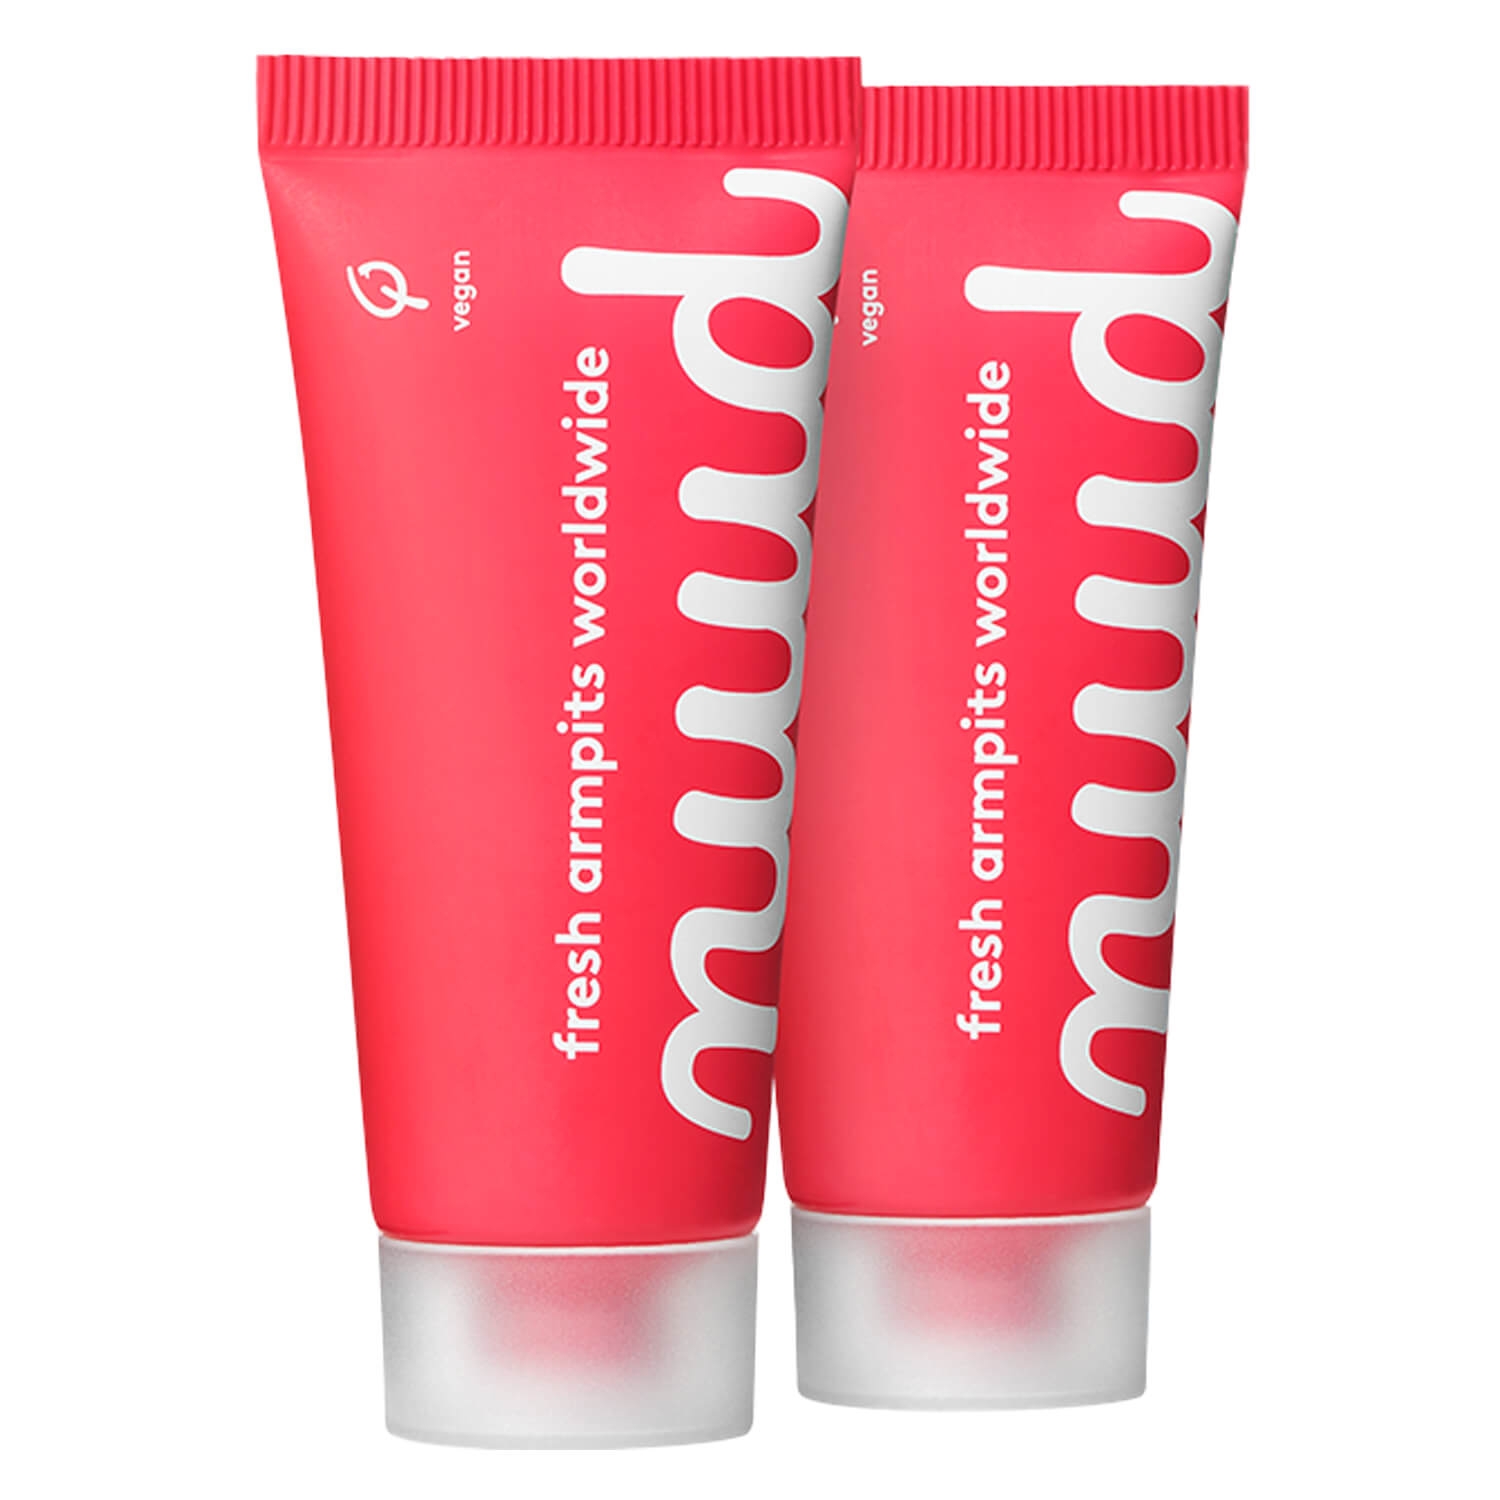 Product image from nuud - Deo Smarter Pack pink new formula